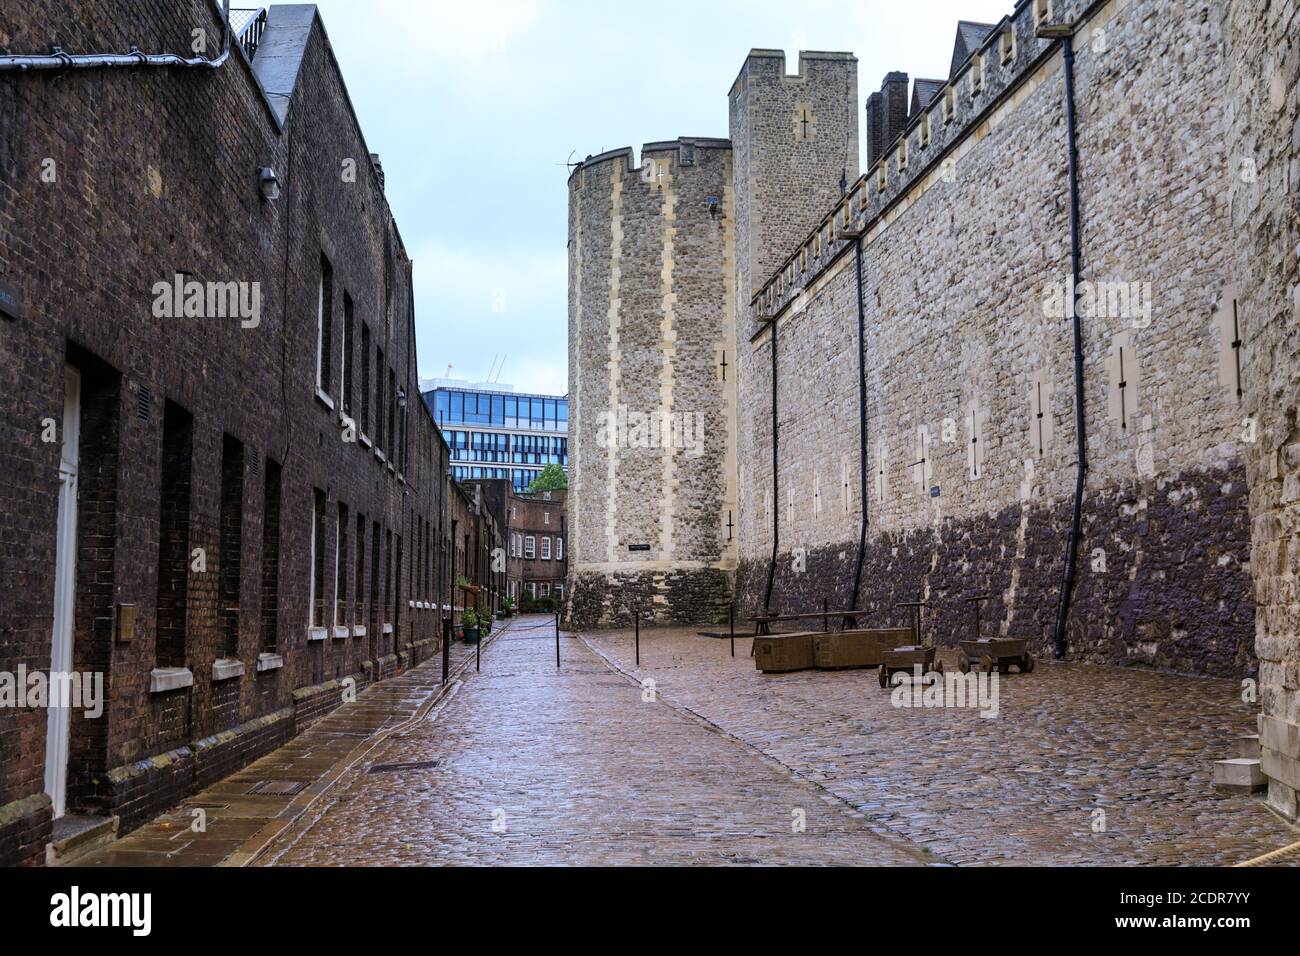 Tower of London buildings and alley, Her Majesty's Royal Palace and Fortress of the Tower of London, historic castle on the River Thames, London, UK Stock Photo